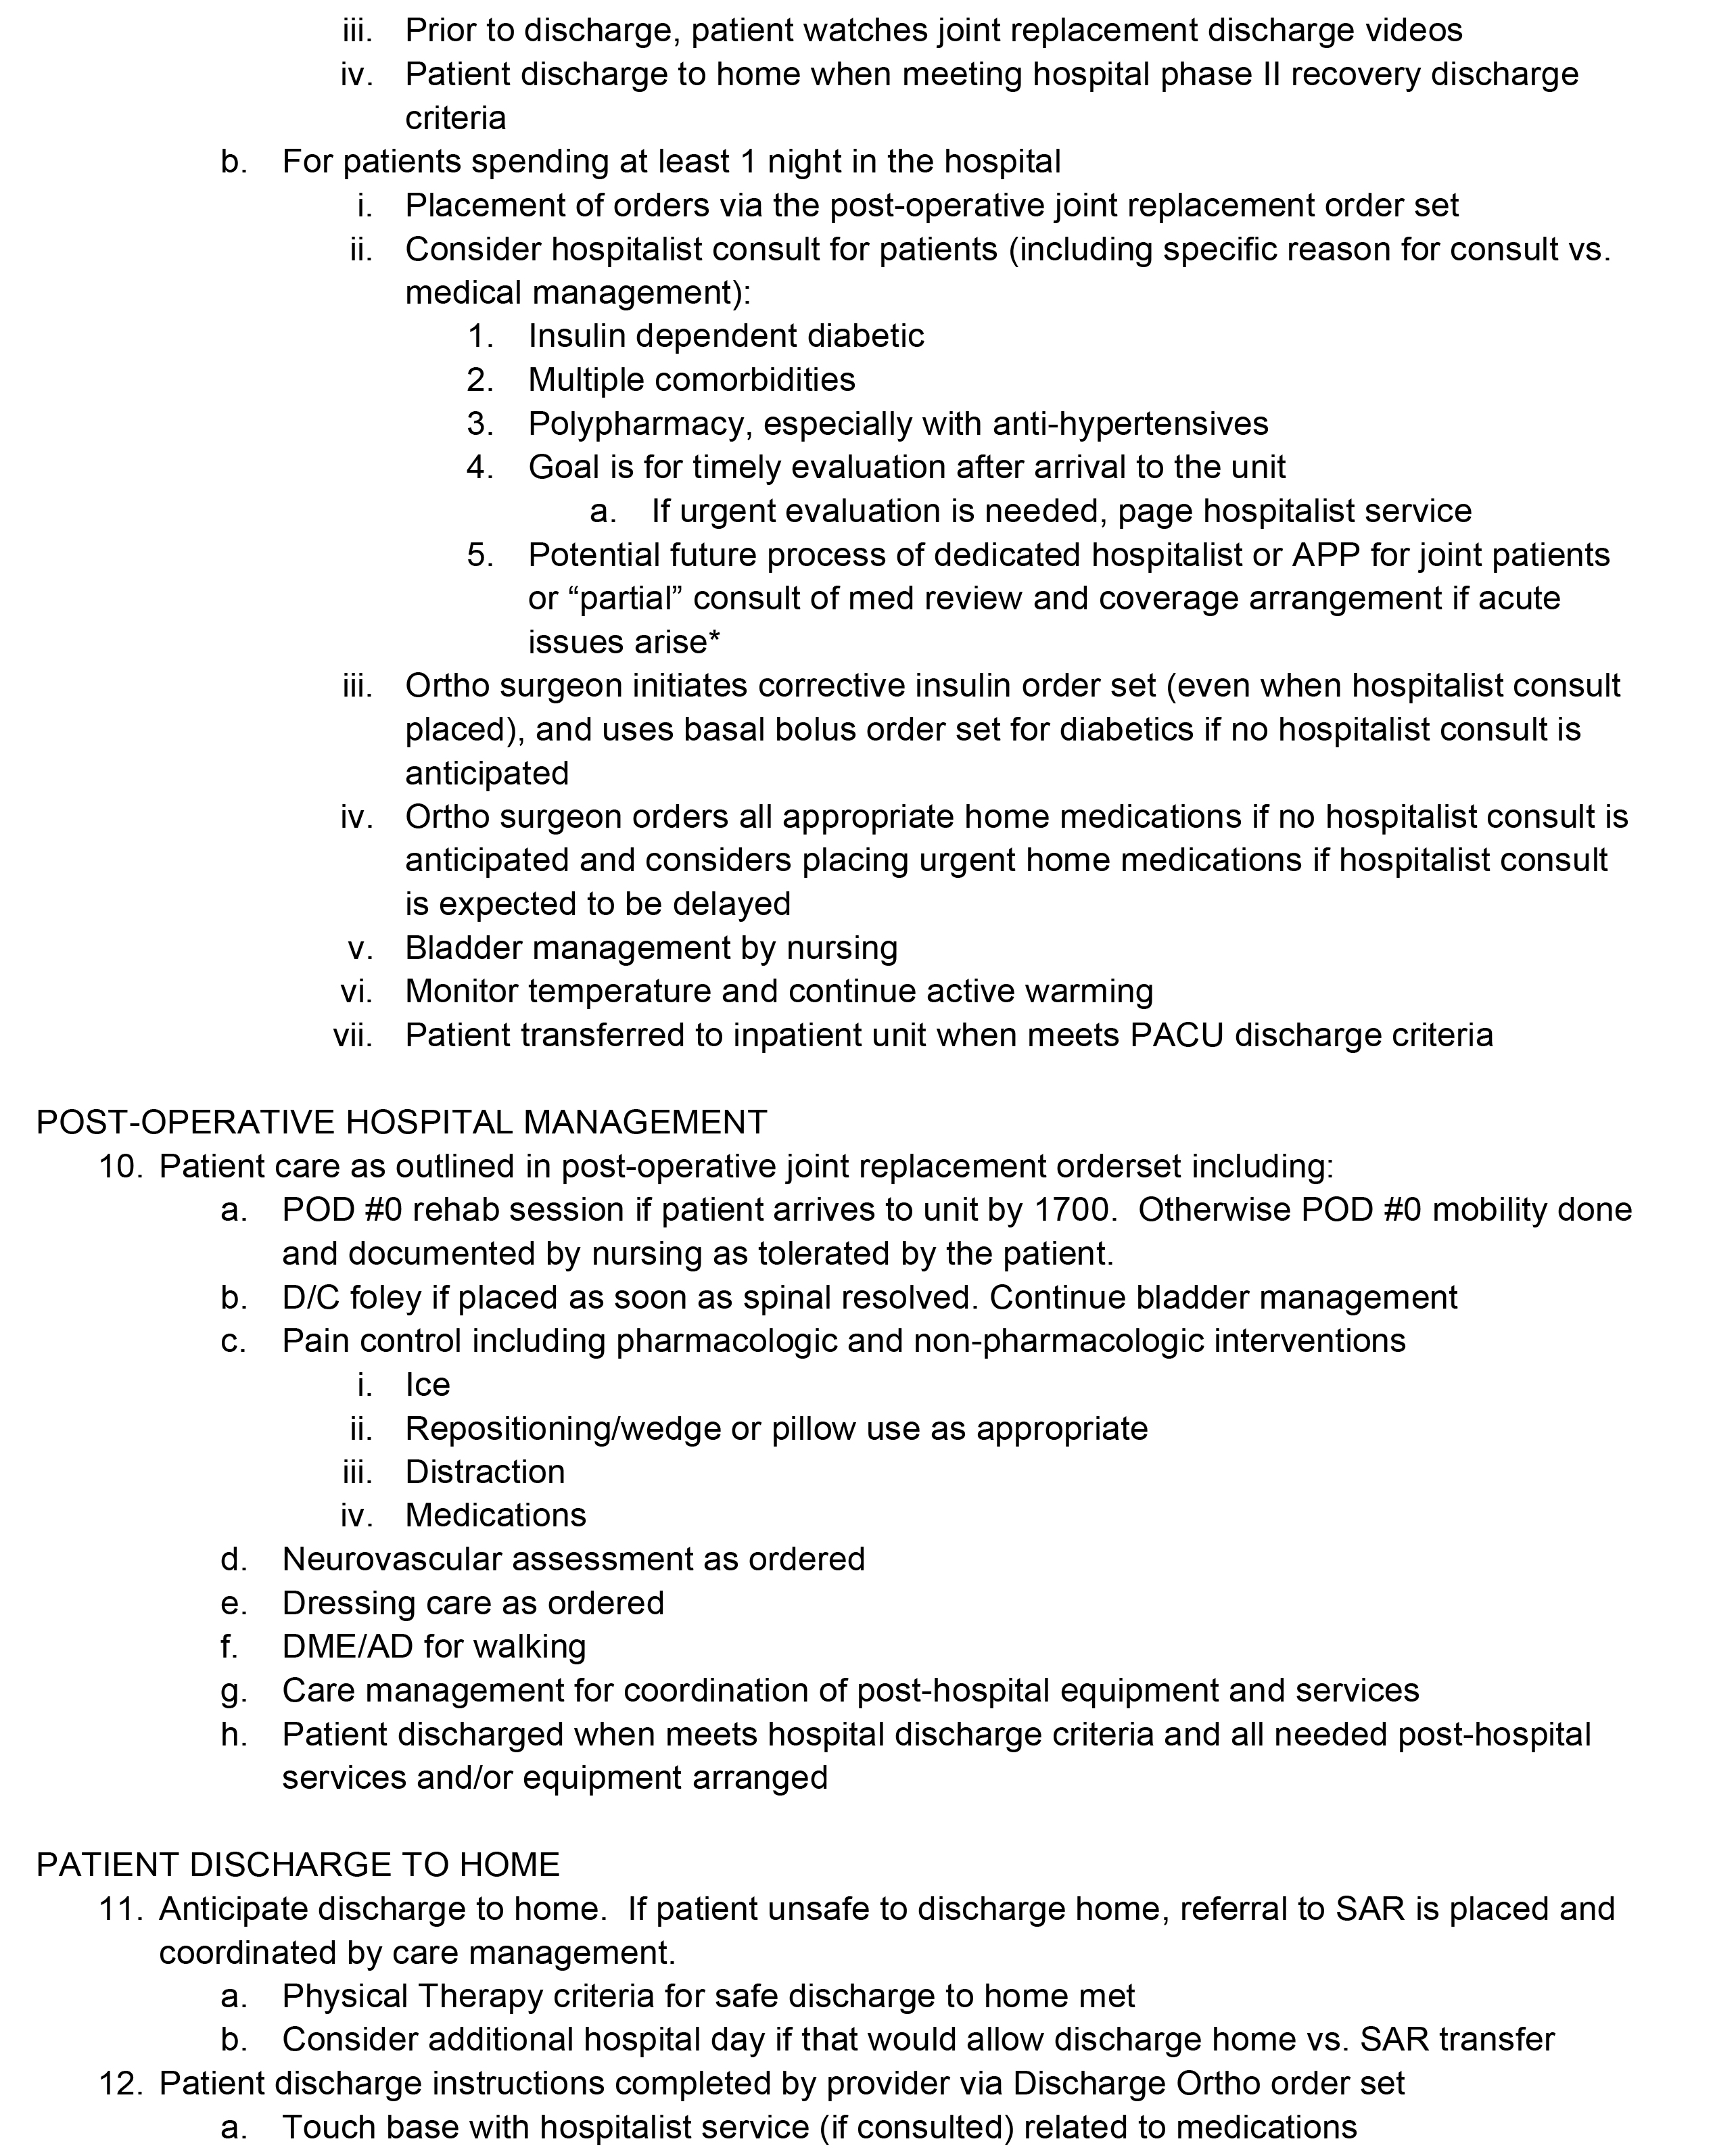 Clinical Guidelines Document Image 6